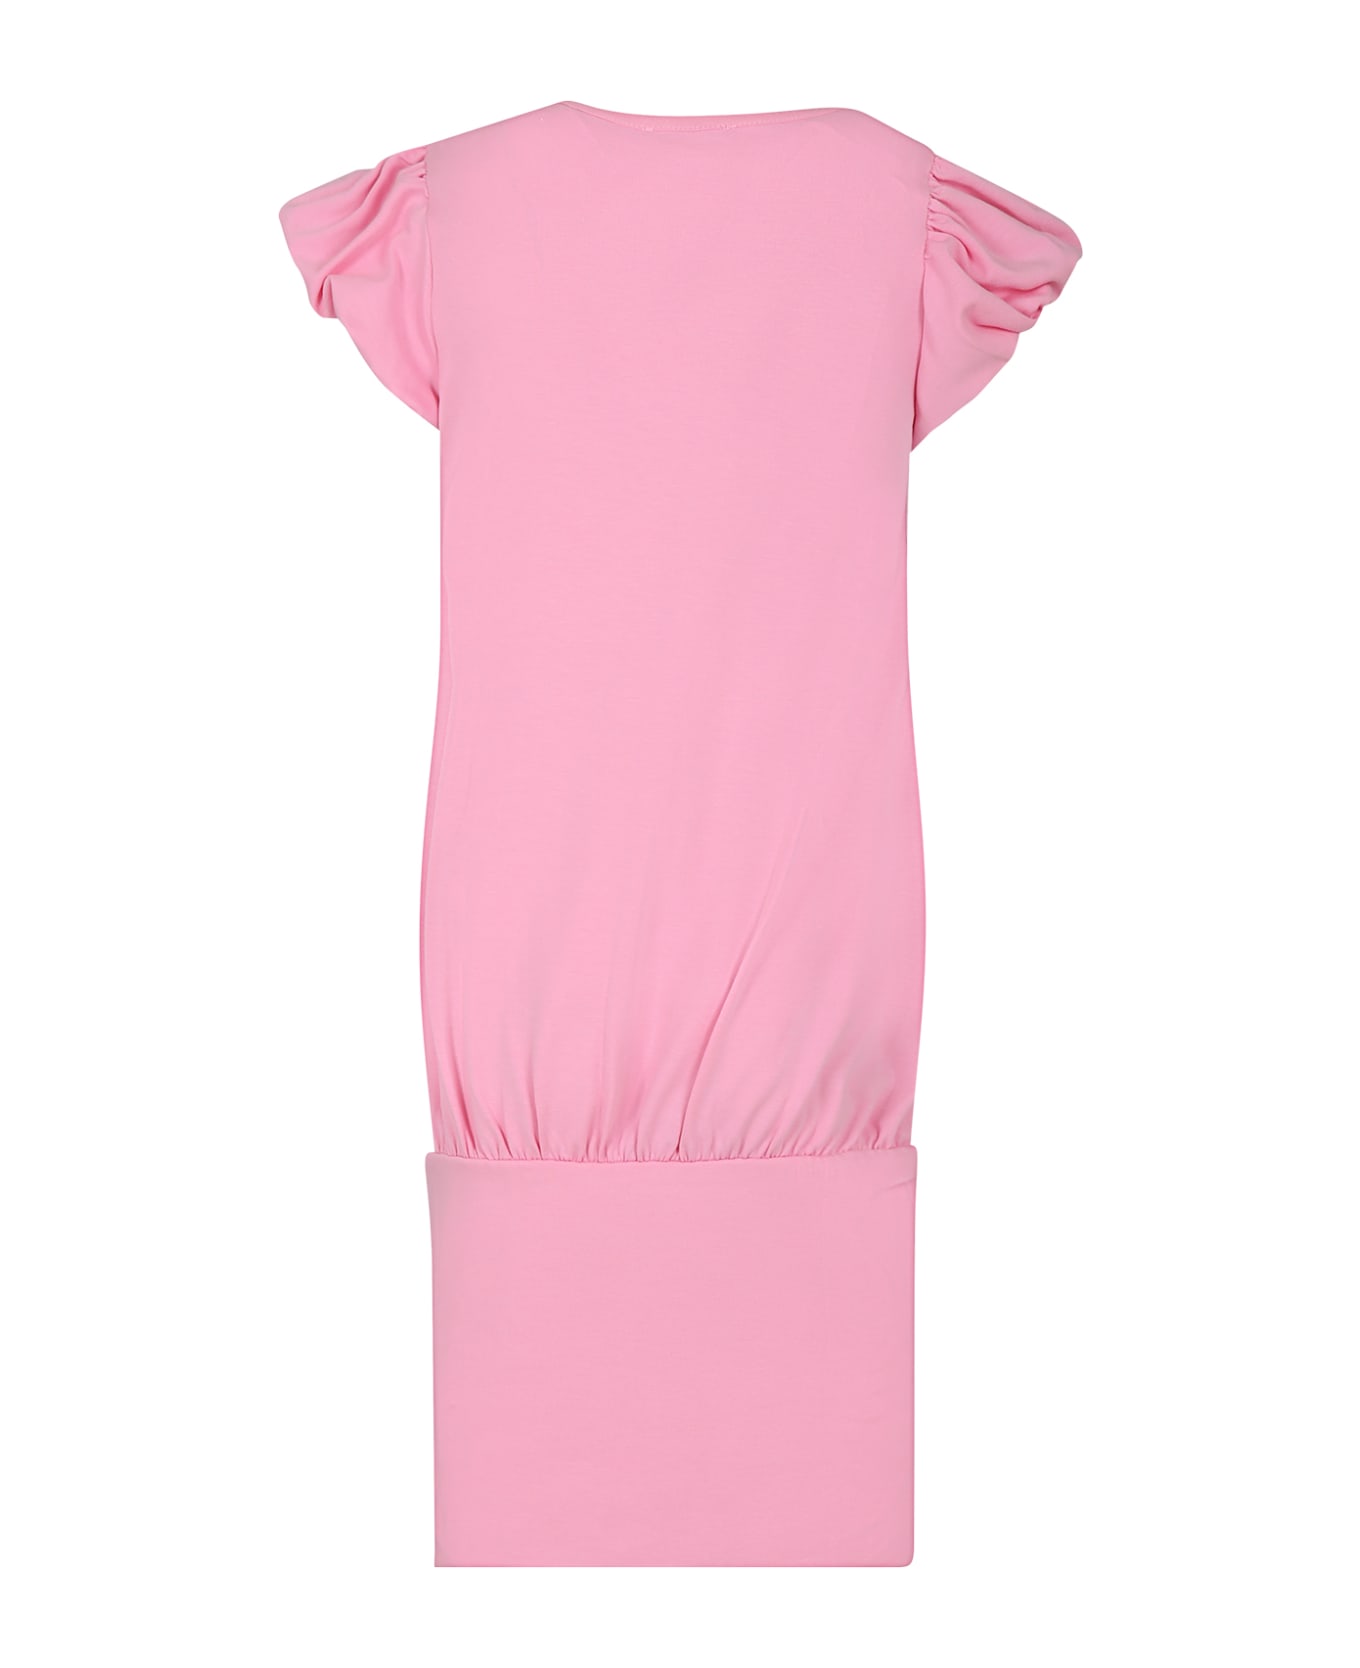 Monnalisa Pink Dress For Girl With Writing And Rhinestone - Pink